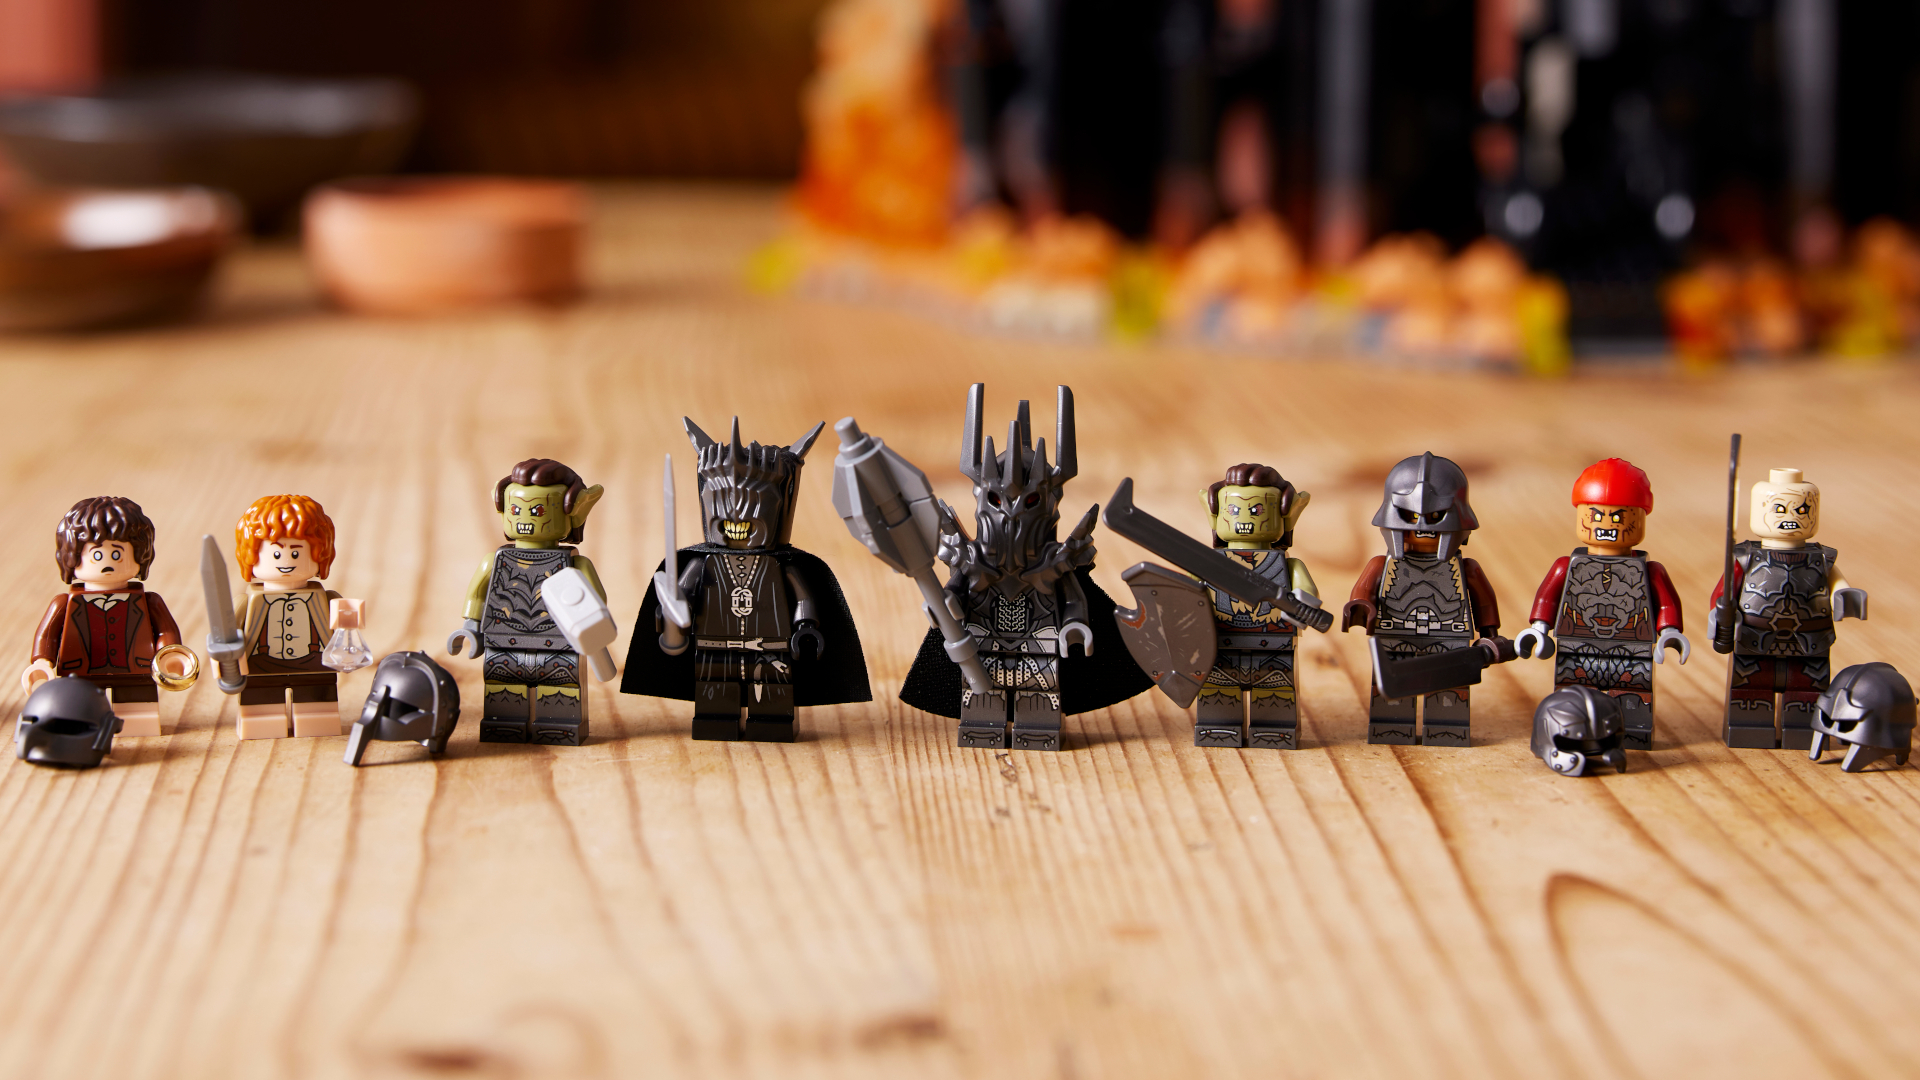 Minifigures from Lego Barad-dur laid out in a row on a wooden table